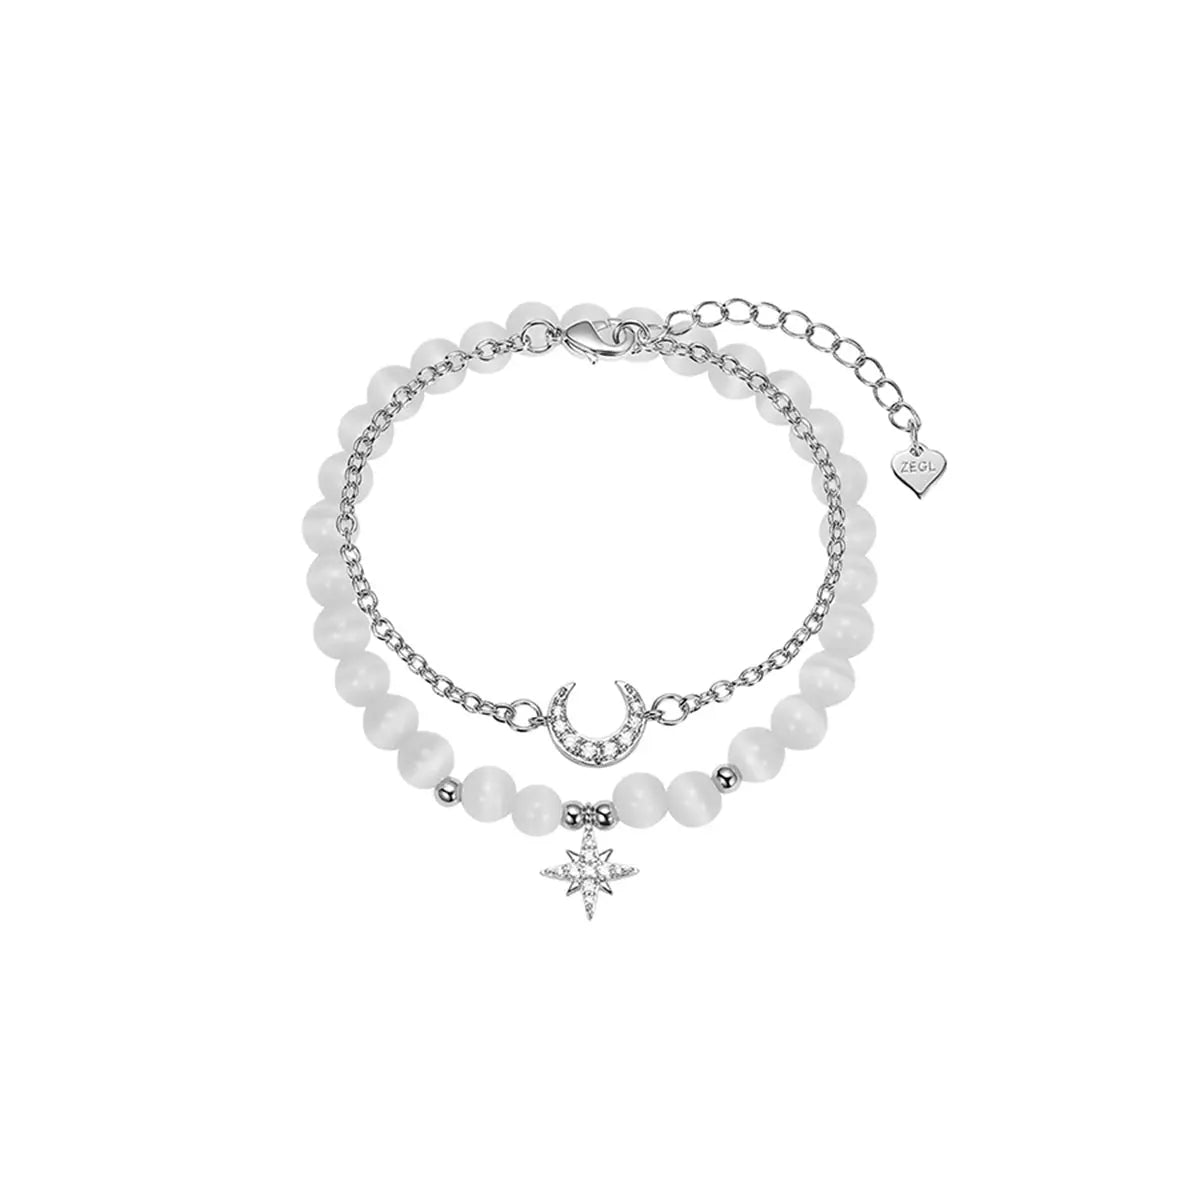 Clear Quartz Opal Bracelet with Star and Moon Charms Healing Crystal Home